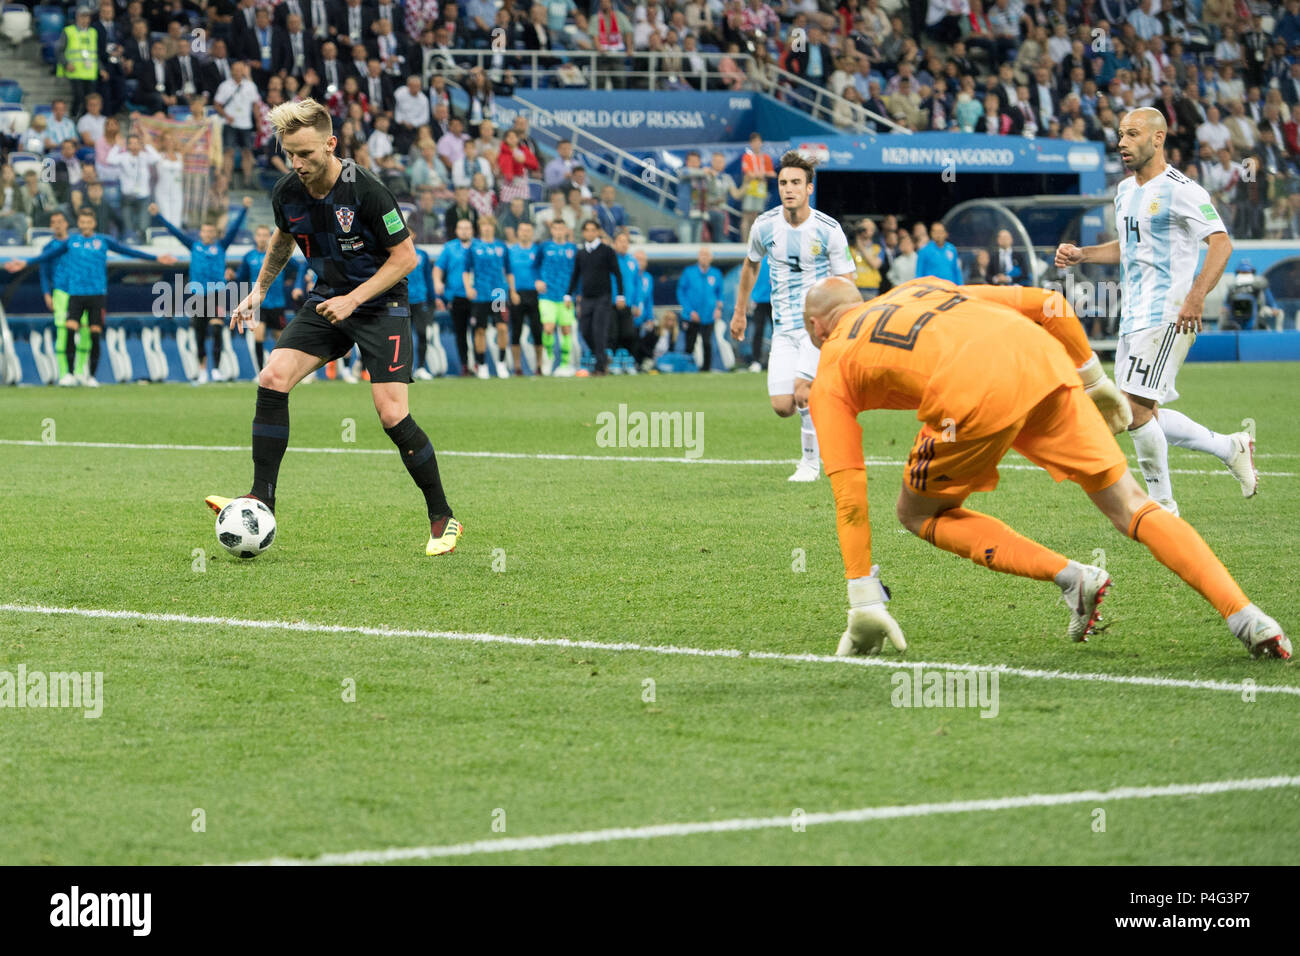 Nizhny Novgorod, Russia. 21 June 2018.  Ivan RAKITIC (left, CRO) shoots goalkeeper Wilfredo CABALLERO (ARG) the goal to make it 3-0 for Croatia, Action, Argentina (ARG) - Croatia (CRO) 0: 3, Preliminary Round, Group D, Match 23, on 21.06. 2018 in Moscow; Football World Cup 2018 in Russia from 14.06. - 15.07.2018. | usage worldwide Credit: dpa/Alamy Live News Credit: dpa picture alliance/Alamy Live News Stock Photo